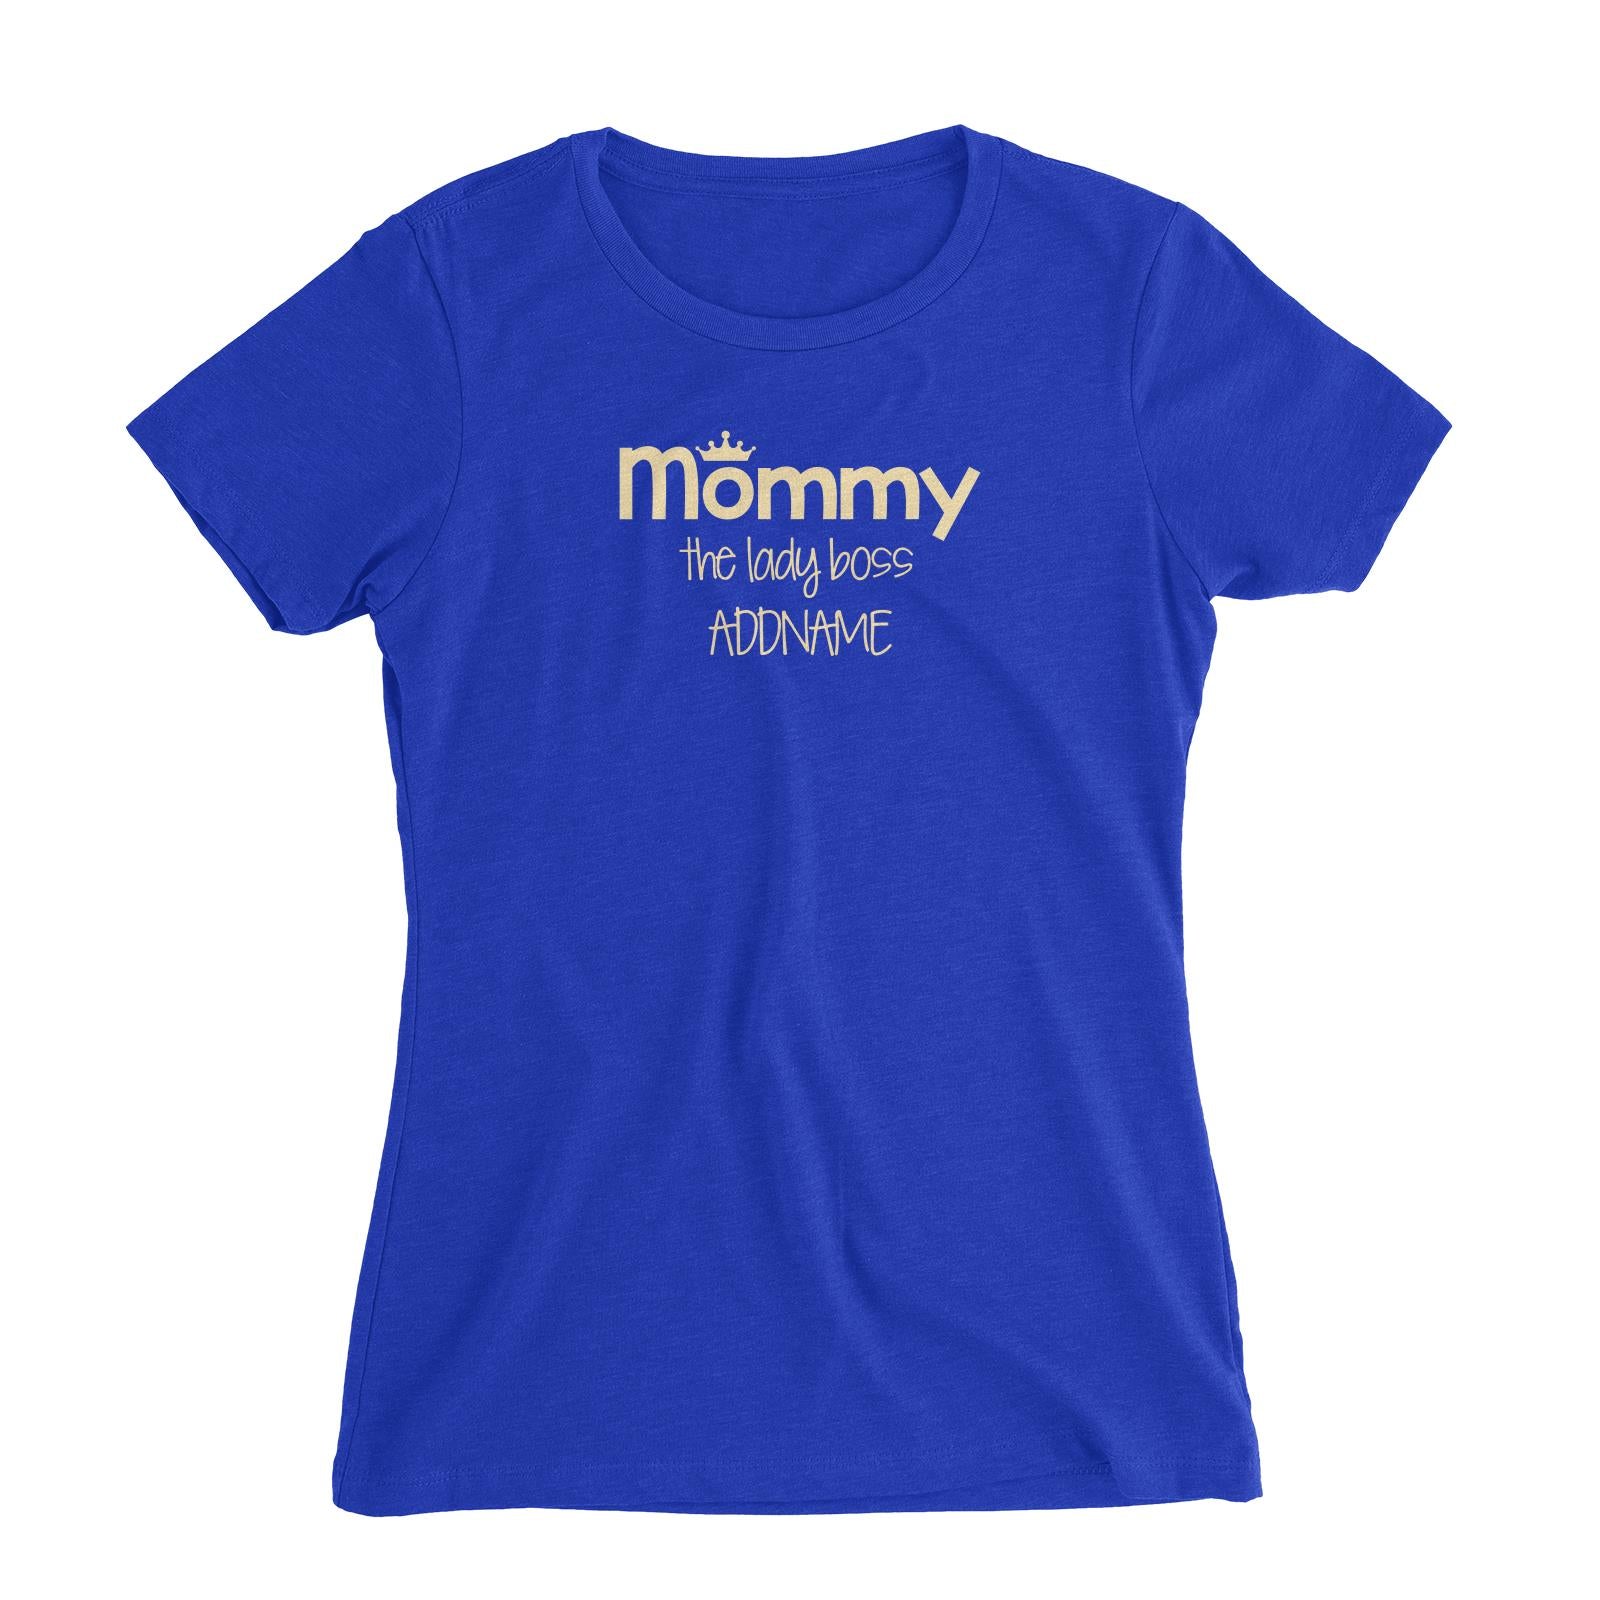 Mommy with Tiara The Lady Boss Women's Slim Fit T-Shirt